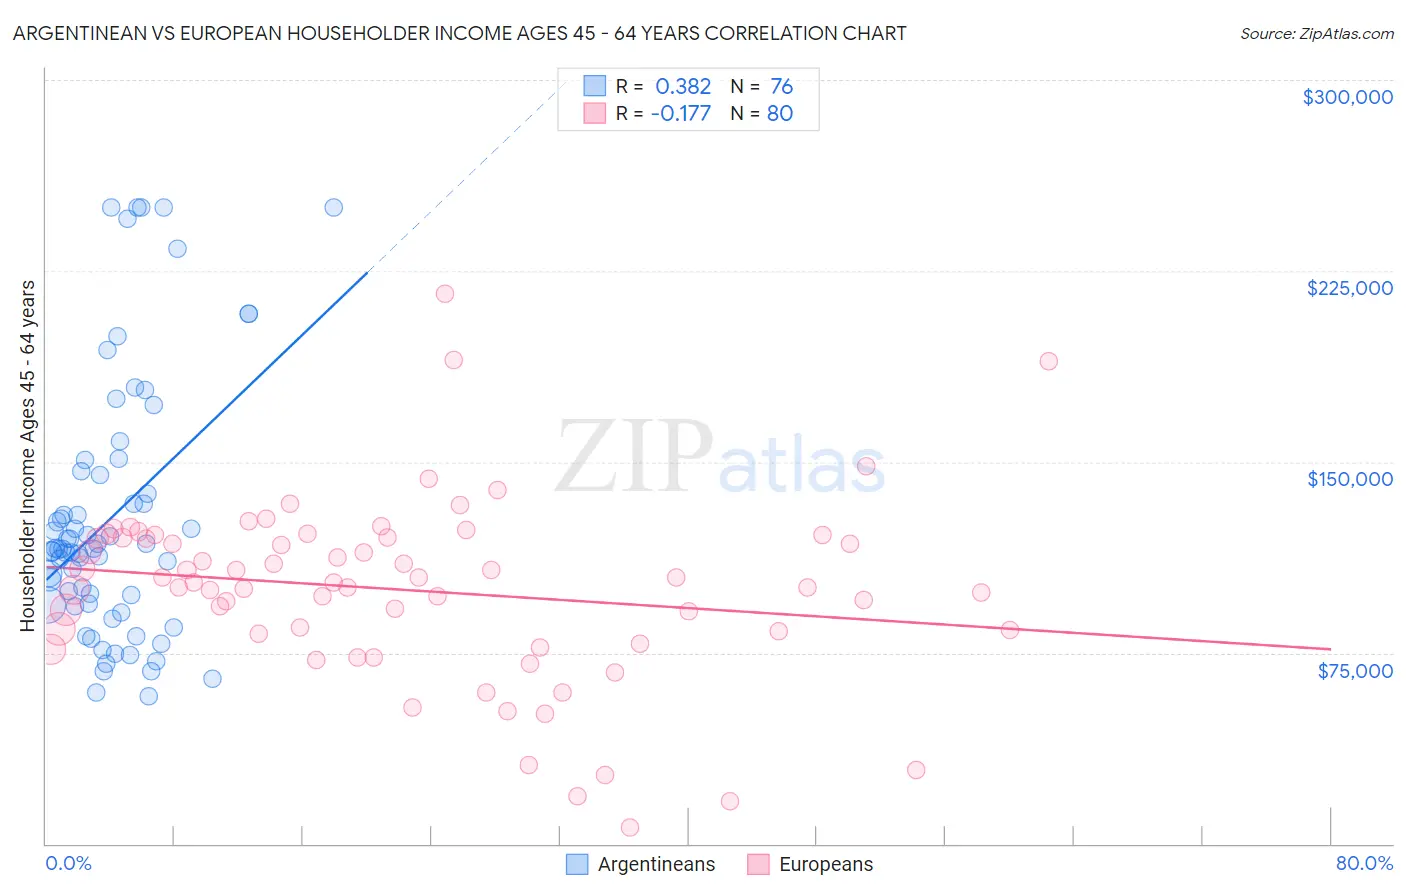 Argentinean vs European Householder Income Ages 45 - 64 years